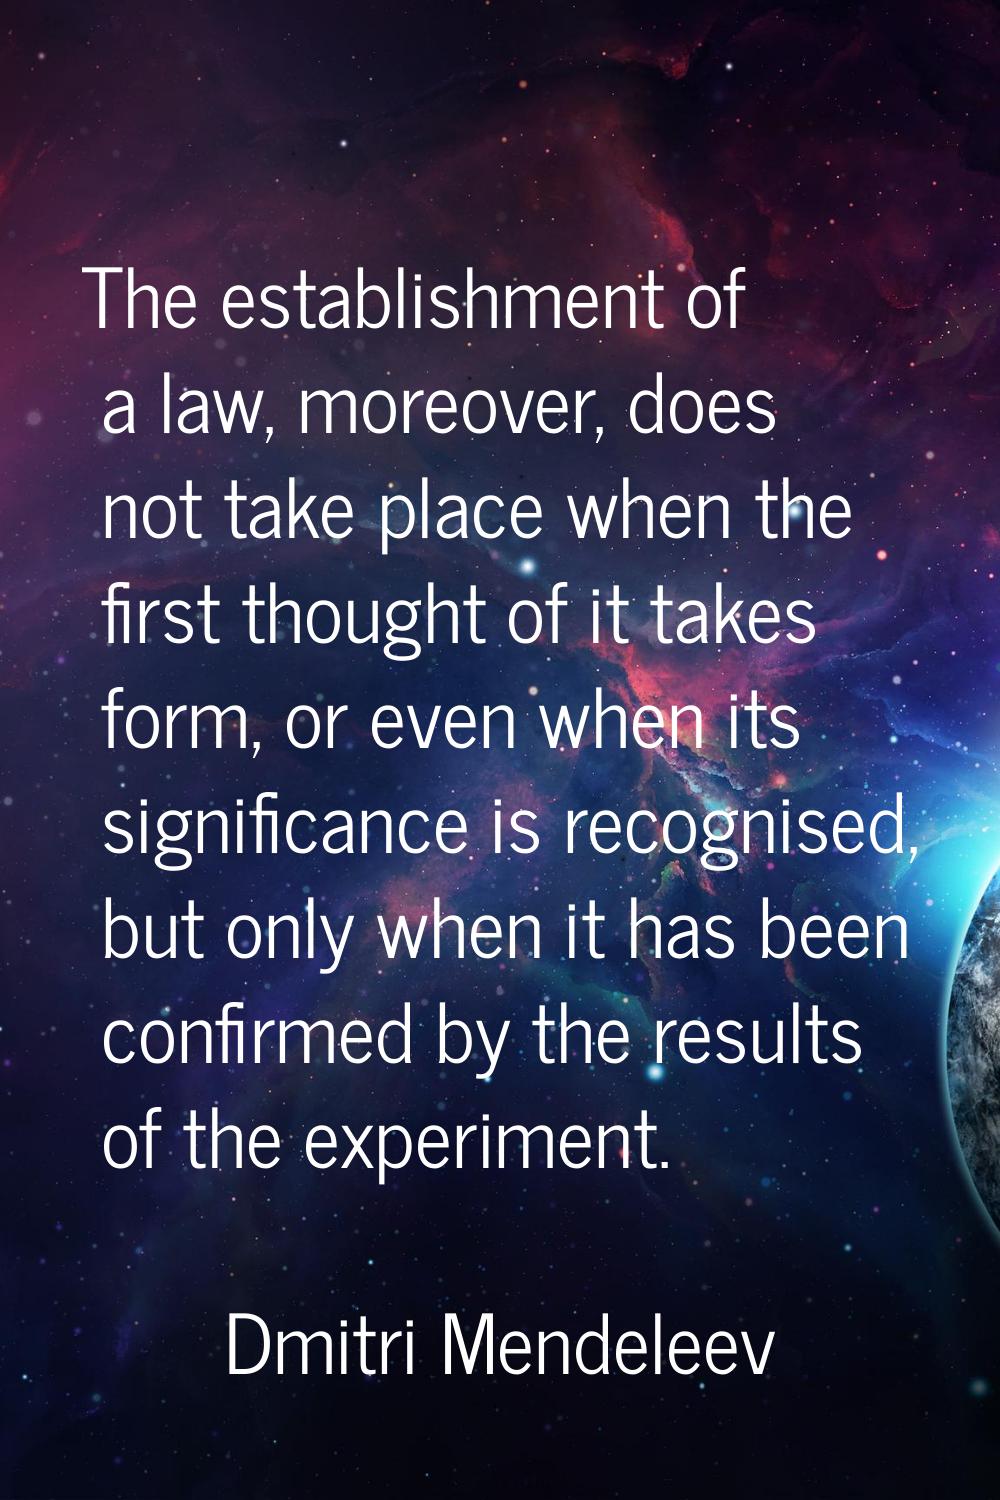 The establishment of a law, moreover, does not take place when the first thought of it takes form, 